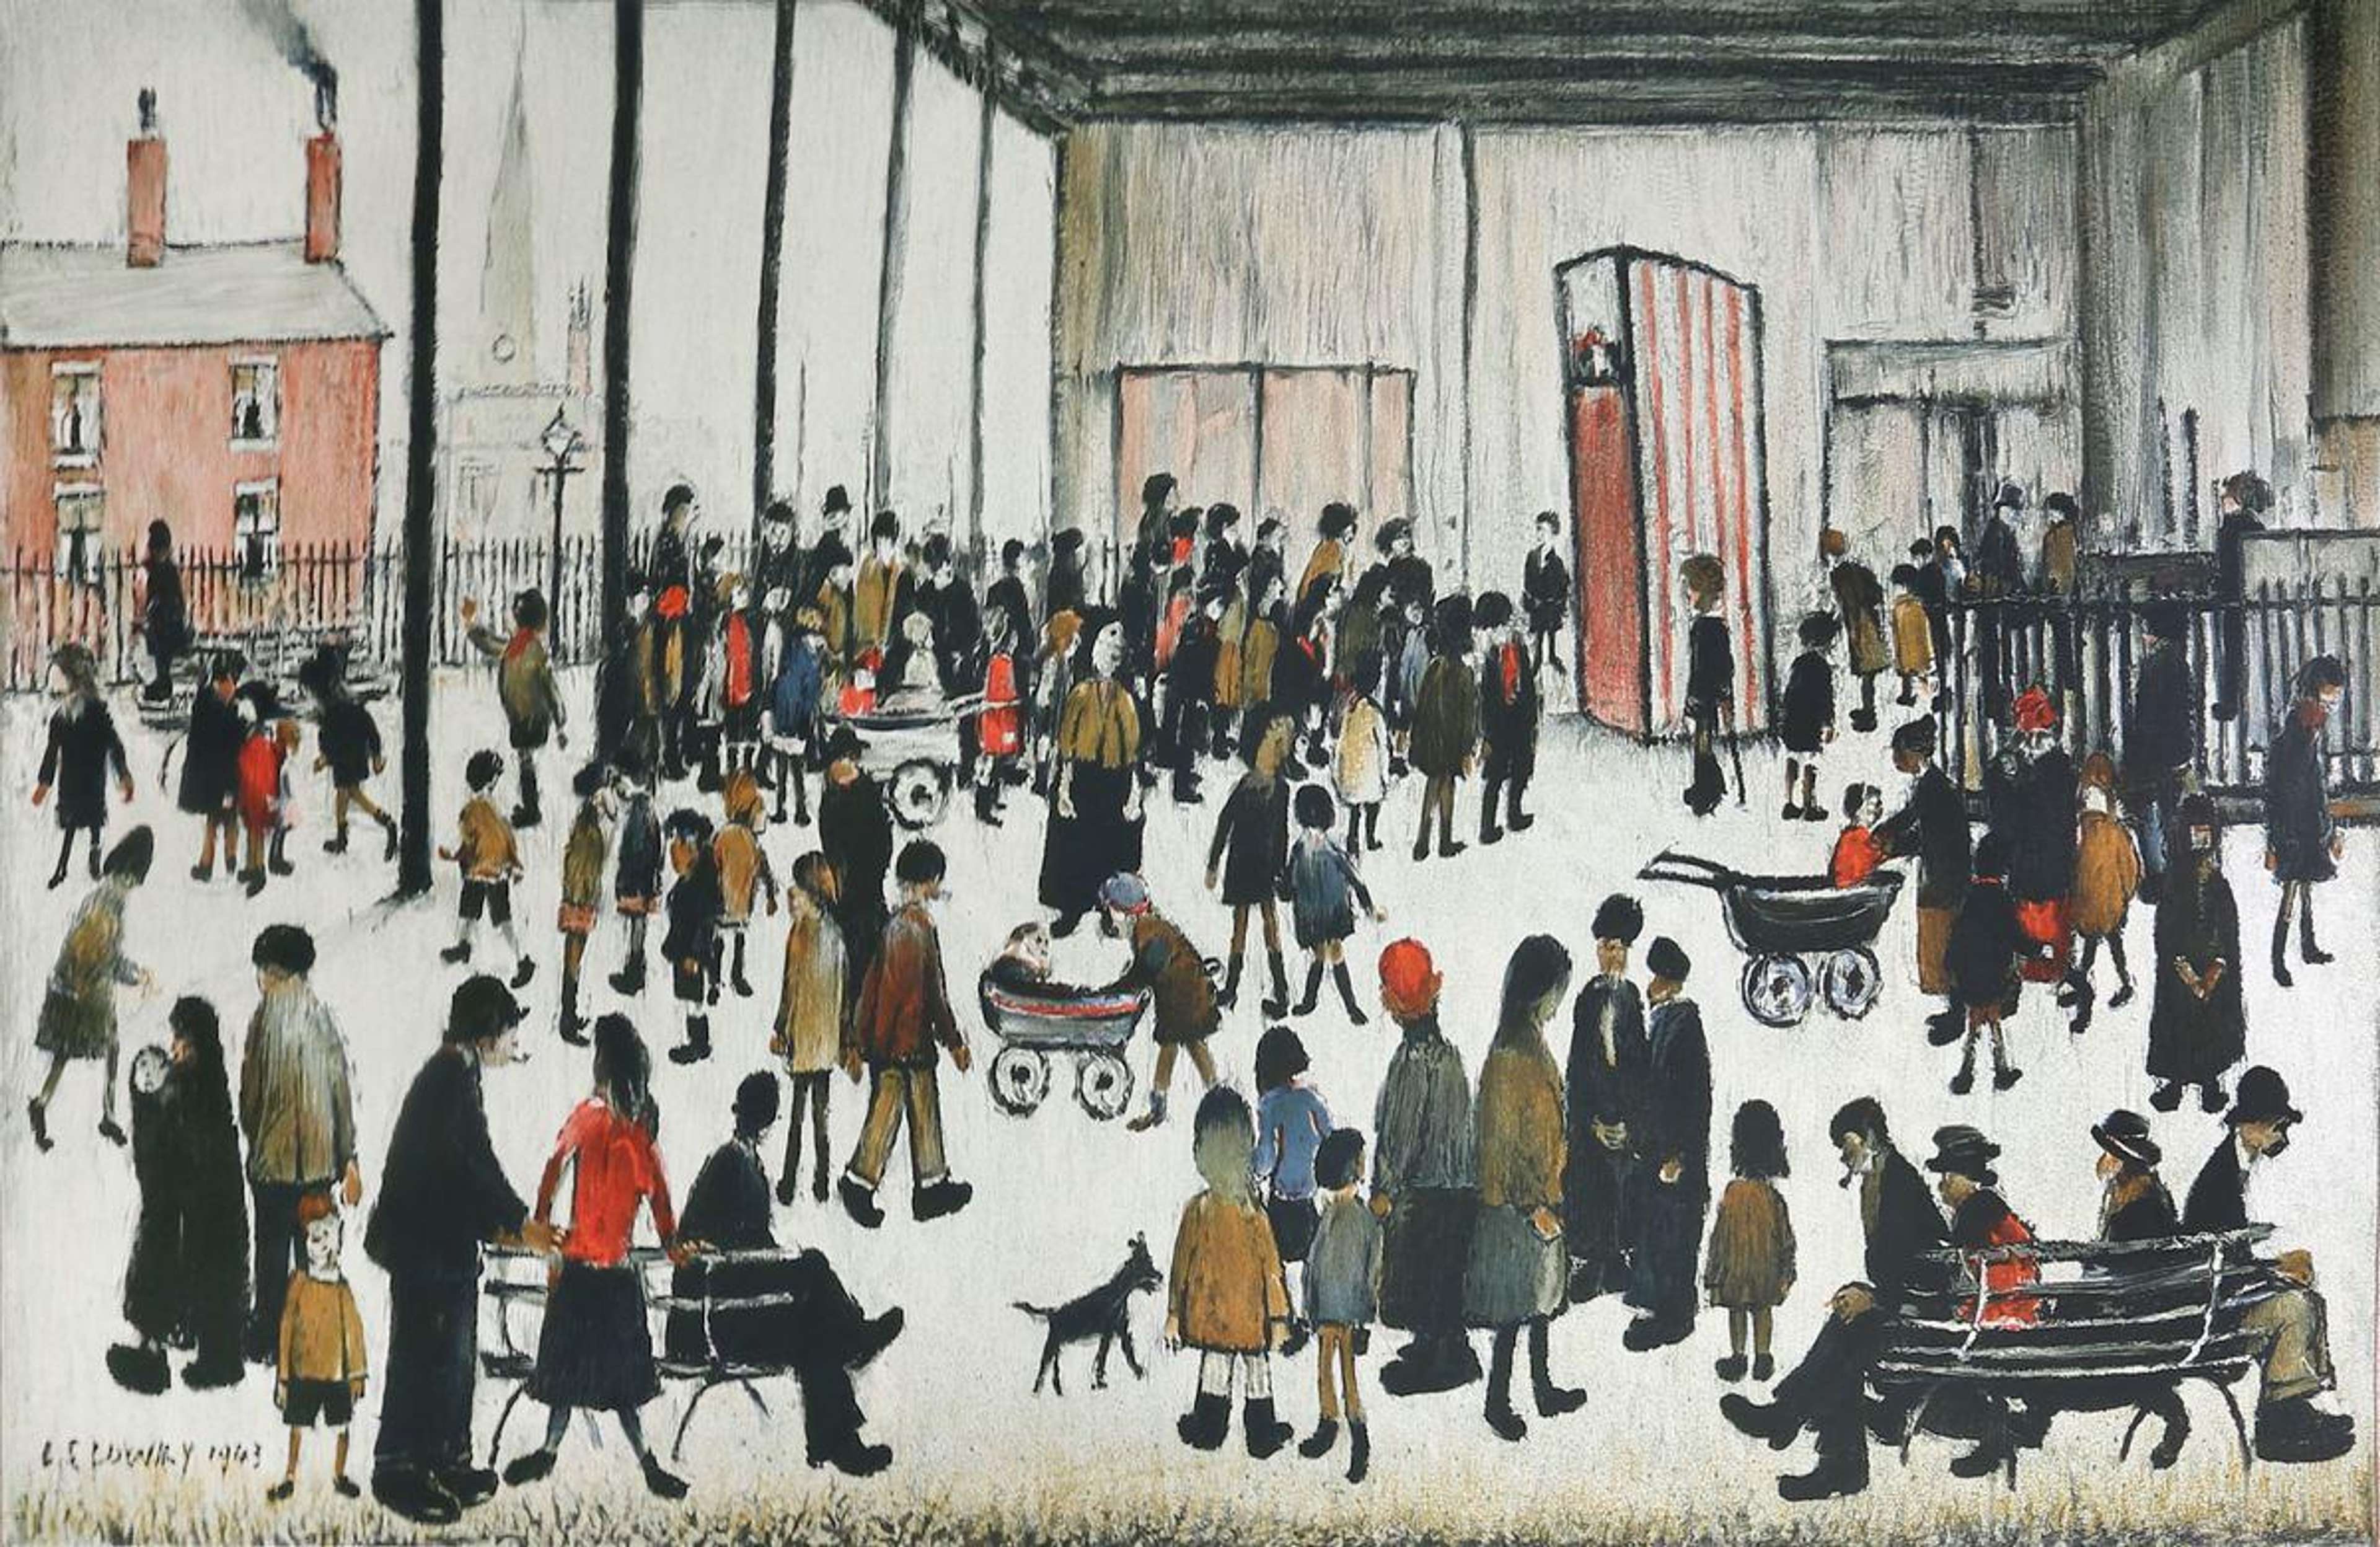 Punch And Judy is a typical scene by L. S. Lowry, showing a mass of people from all walks of life going about their daily business. An urban landscape looms in the background.